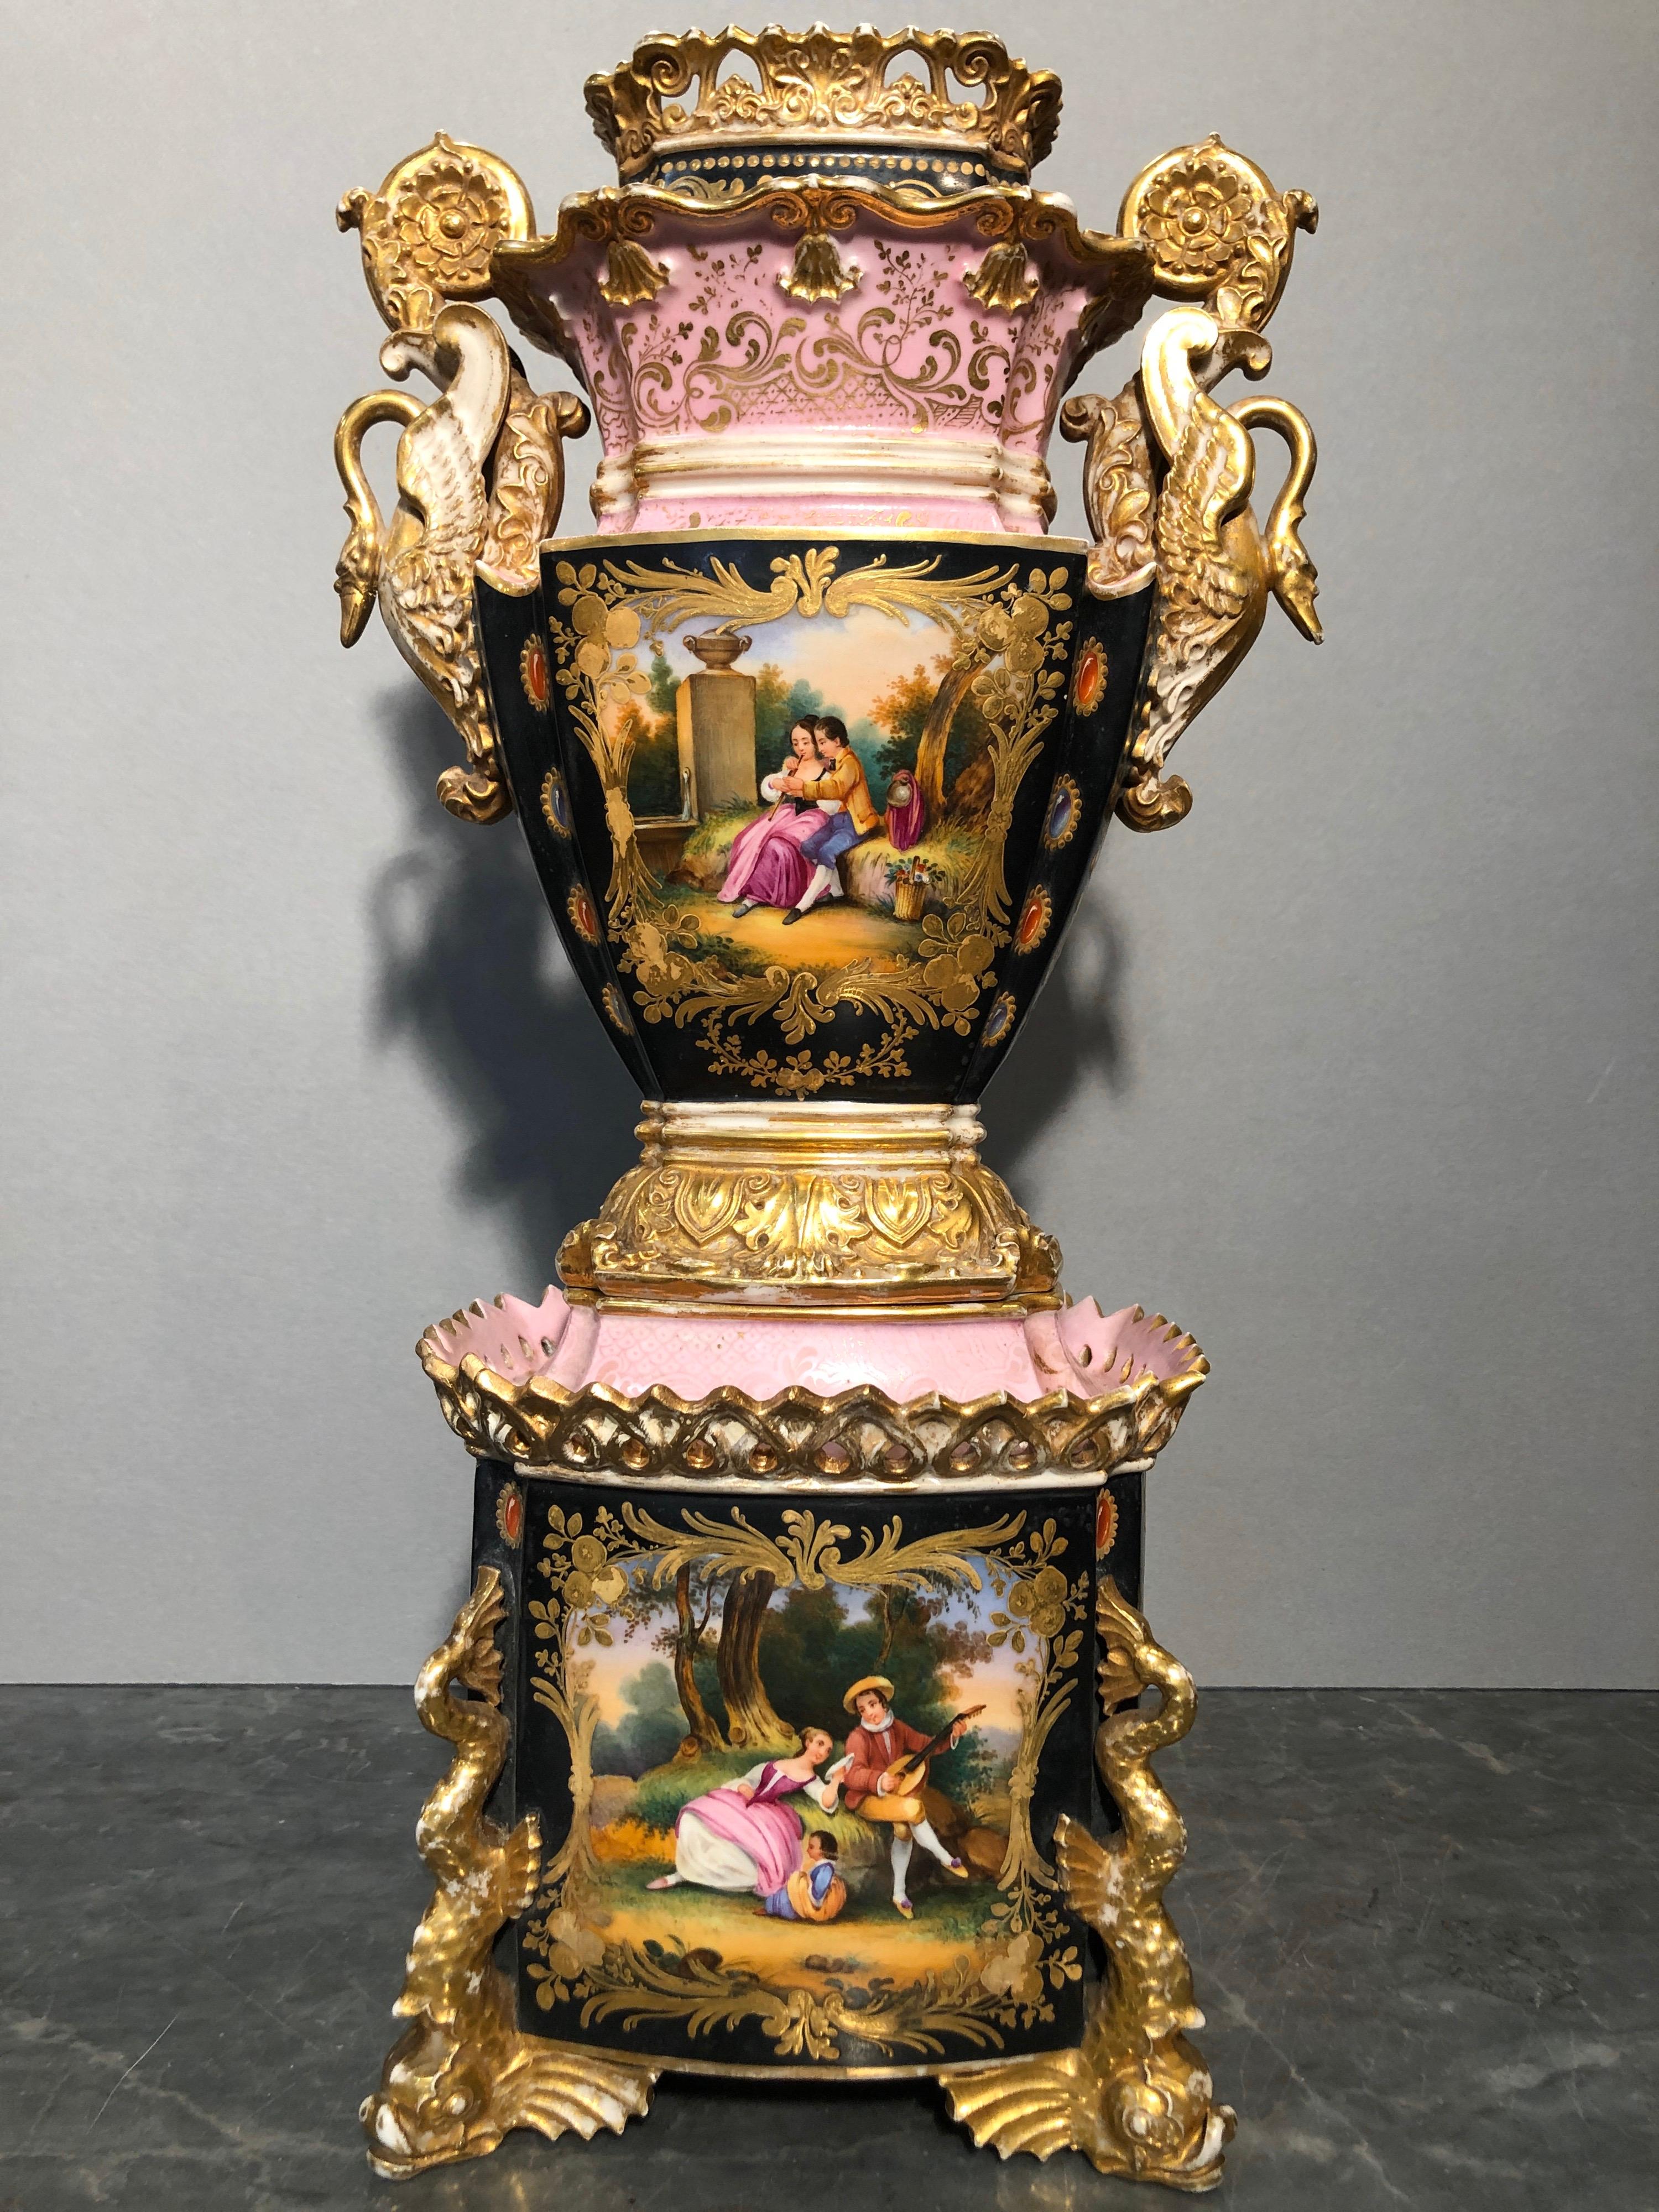 France vase, signed under the rectangular base J.P.
Jacob Petit: Paris,Belleville( France). Jacob Petit produced porcelain here from circa 1790. The products have been highly praised and show an individual style. But porcelain was also made in the